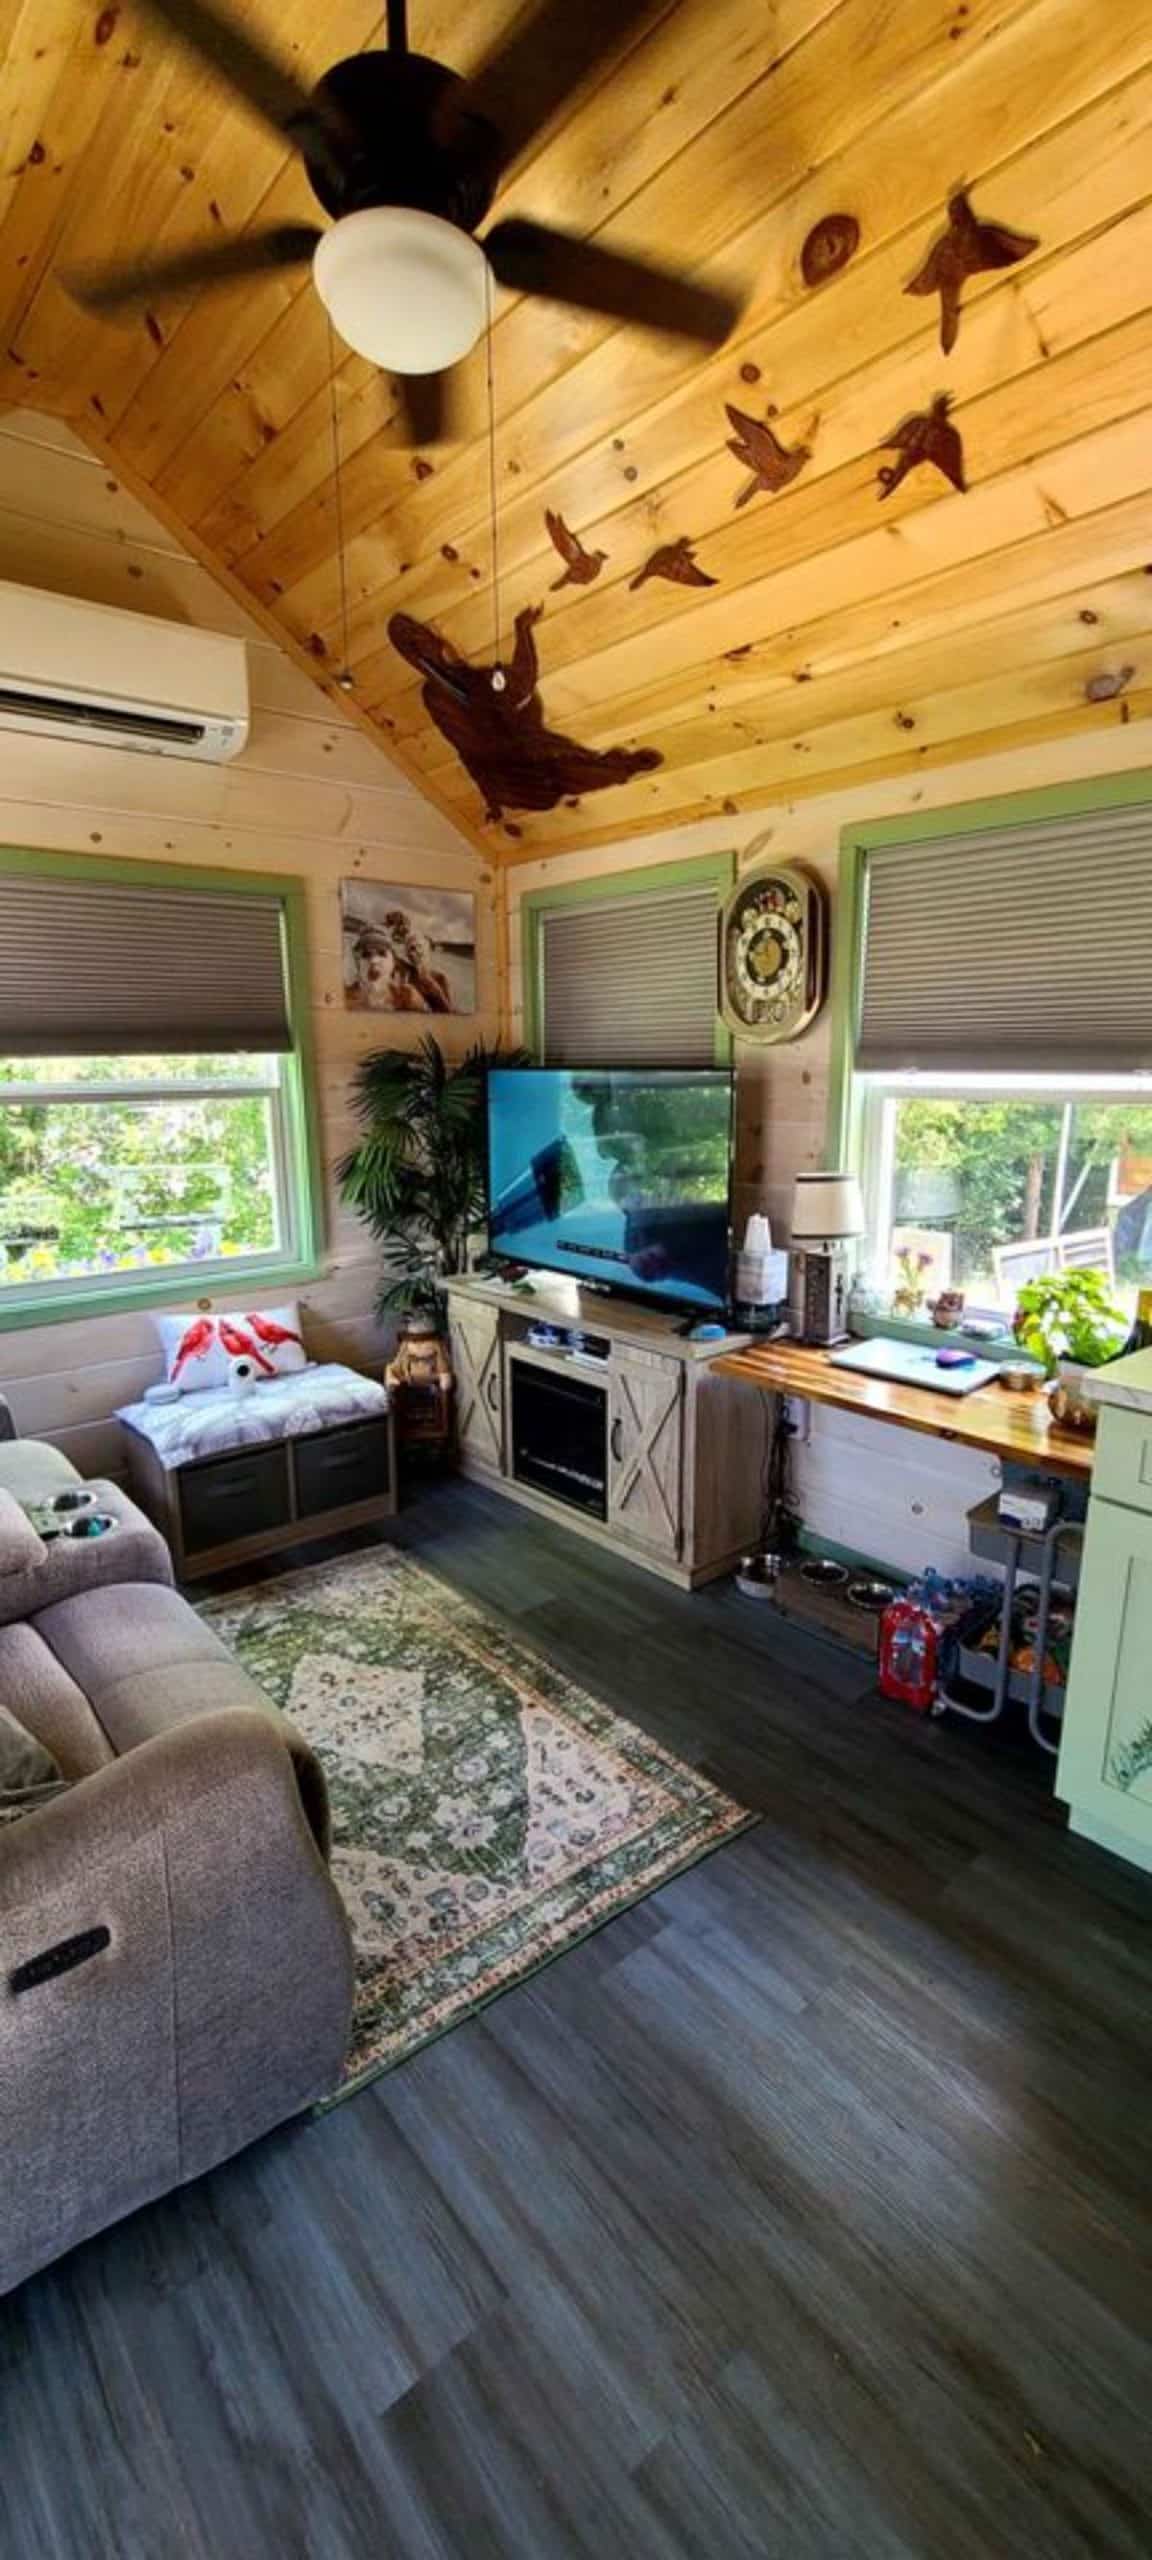 an entertainment unit with wall mounted TV set in living area of mountain tiny home